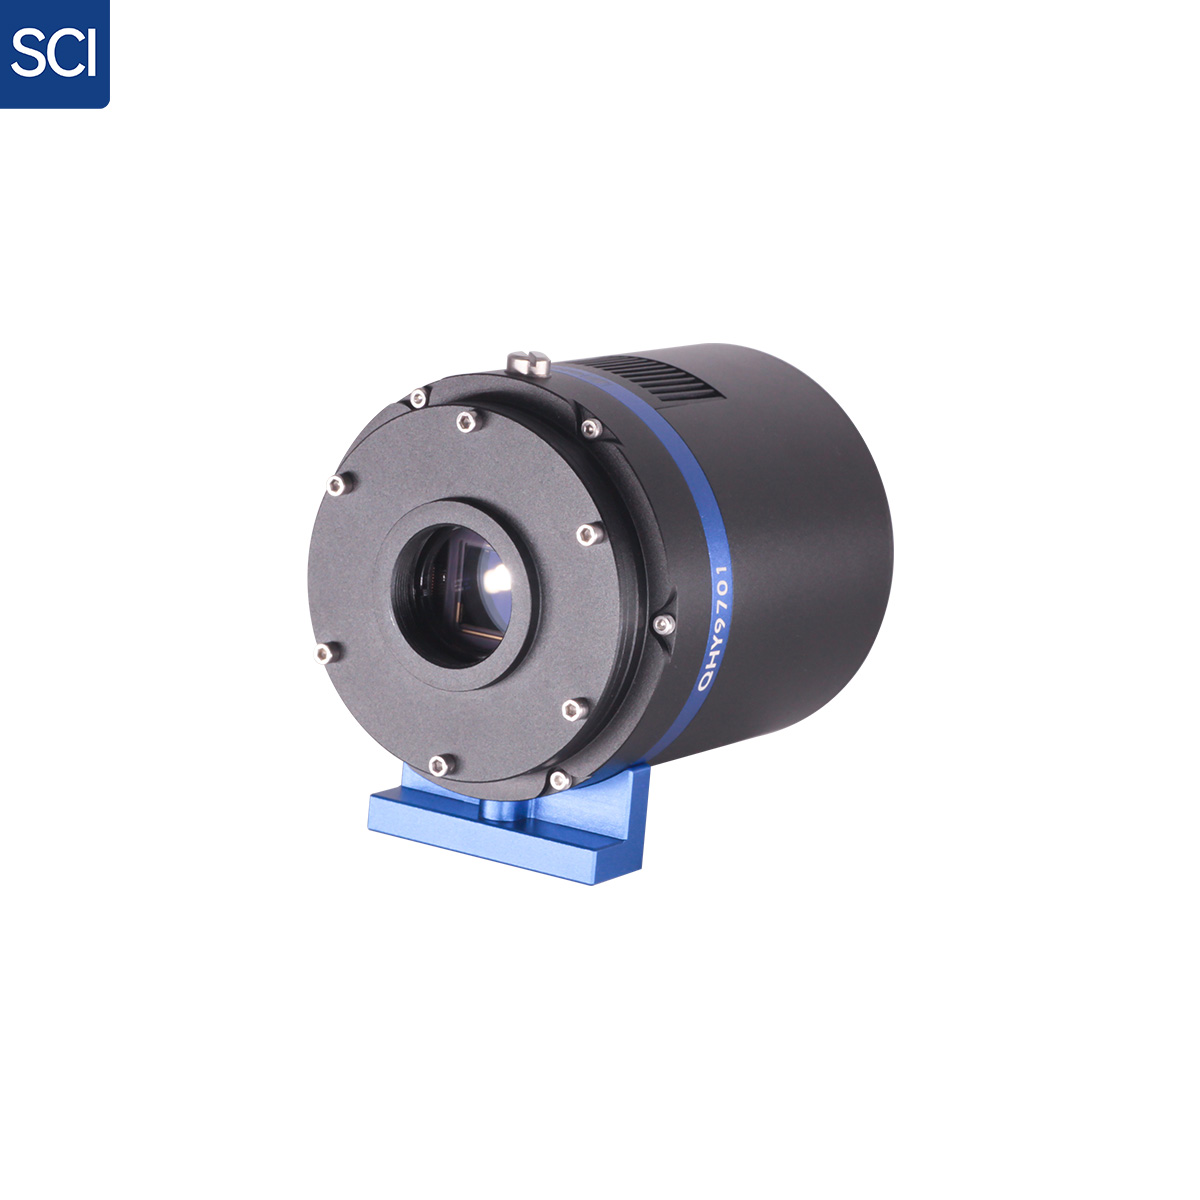 QHY9701 is a cooled scientific CMOS camera with GSENSE9701 back illuminated sCMOS sensor. With the characteristics of large pixels, ultra-wide spectrum and low noise